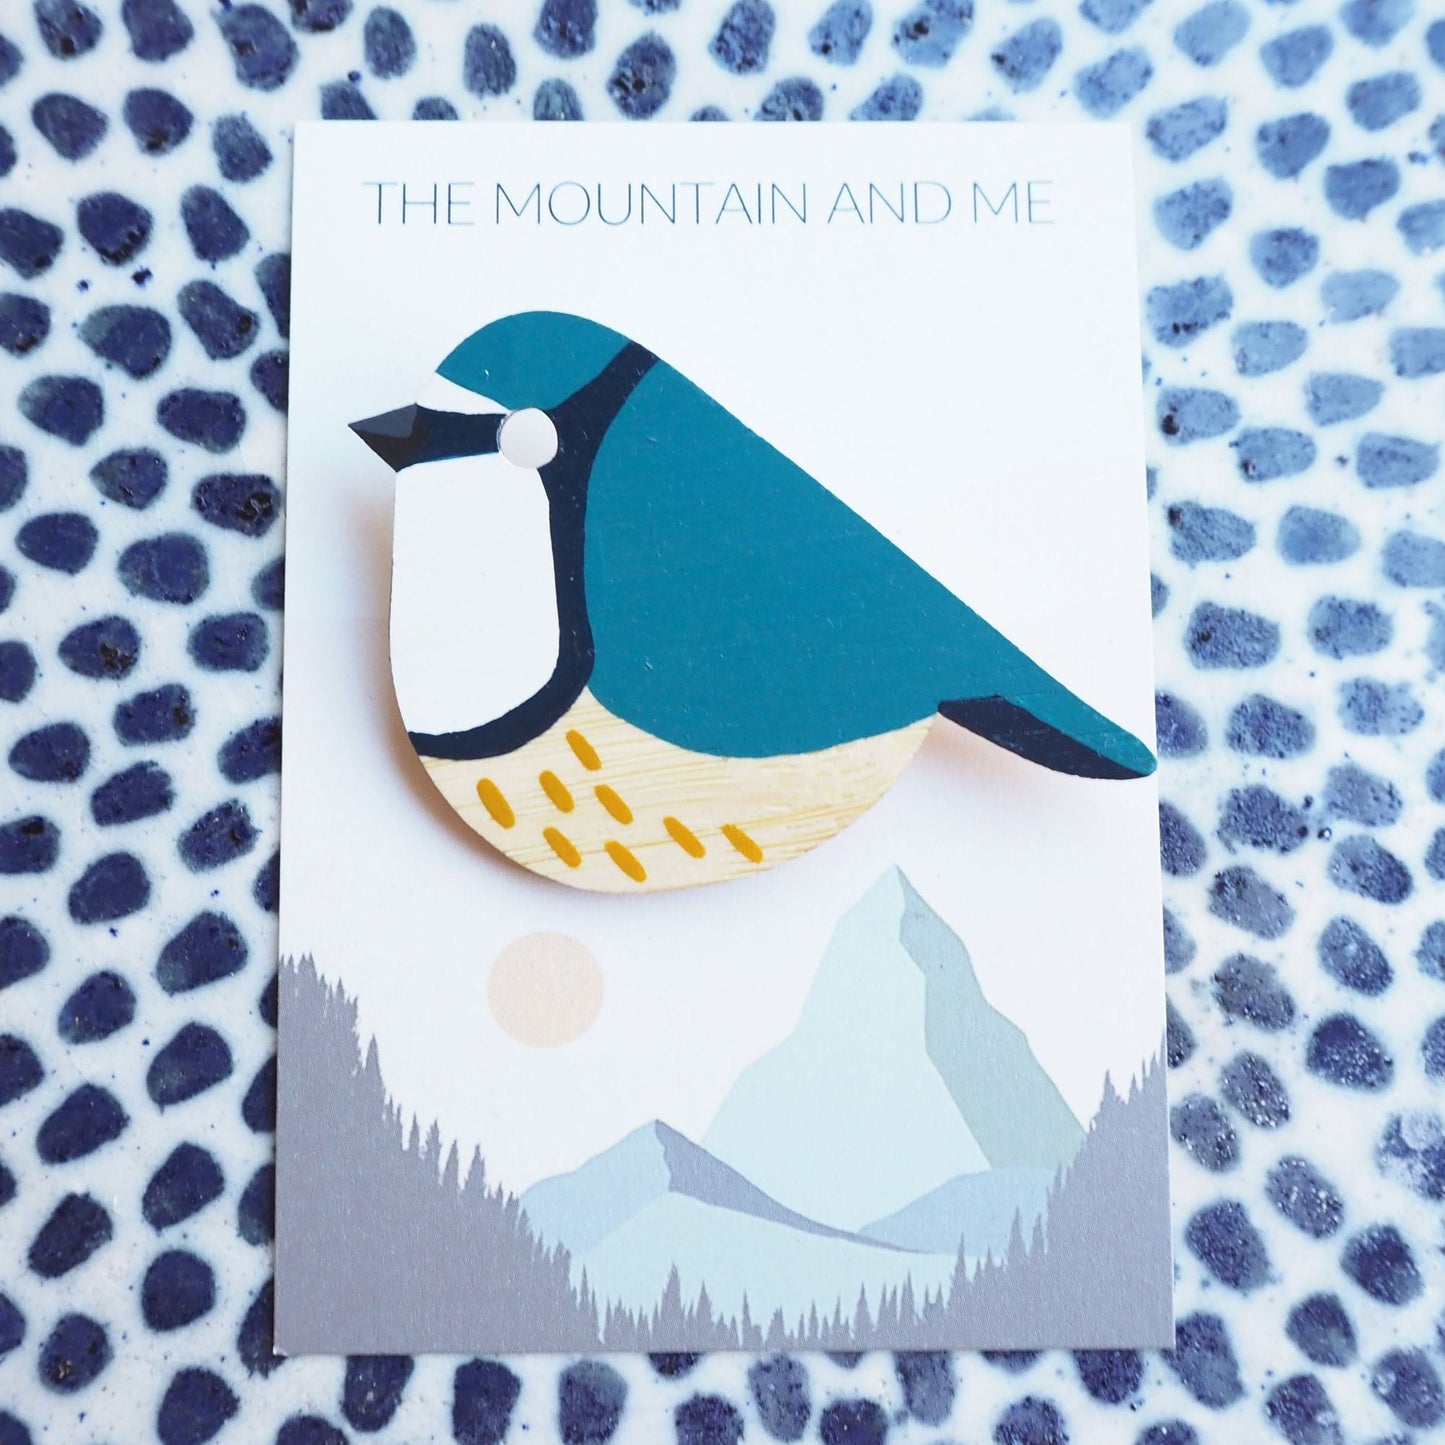 Blue tit bamboo brooch on the Mountain and Me branded backing card. The background is a blue dotted white tile.